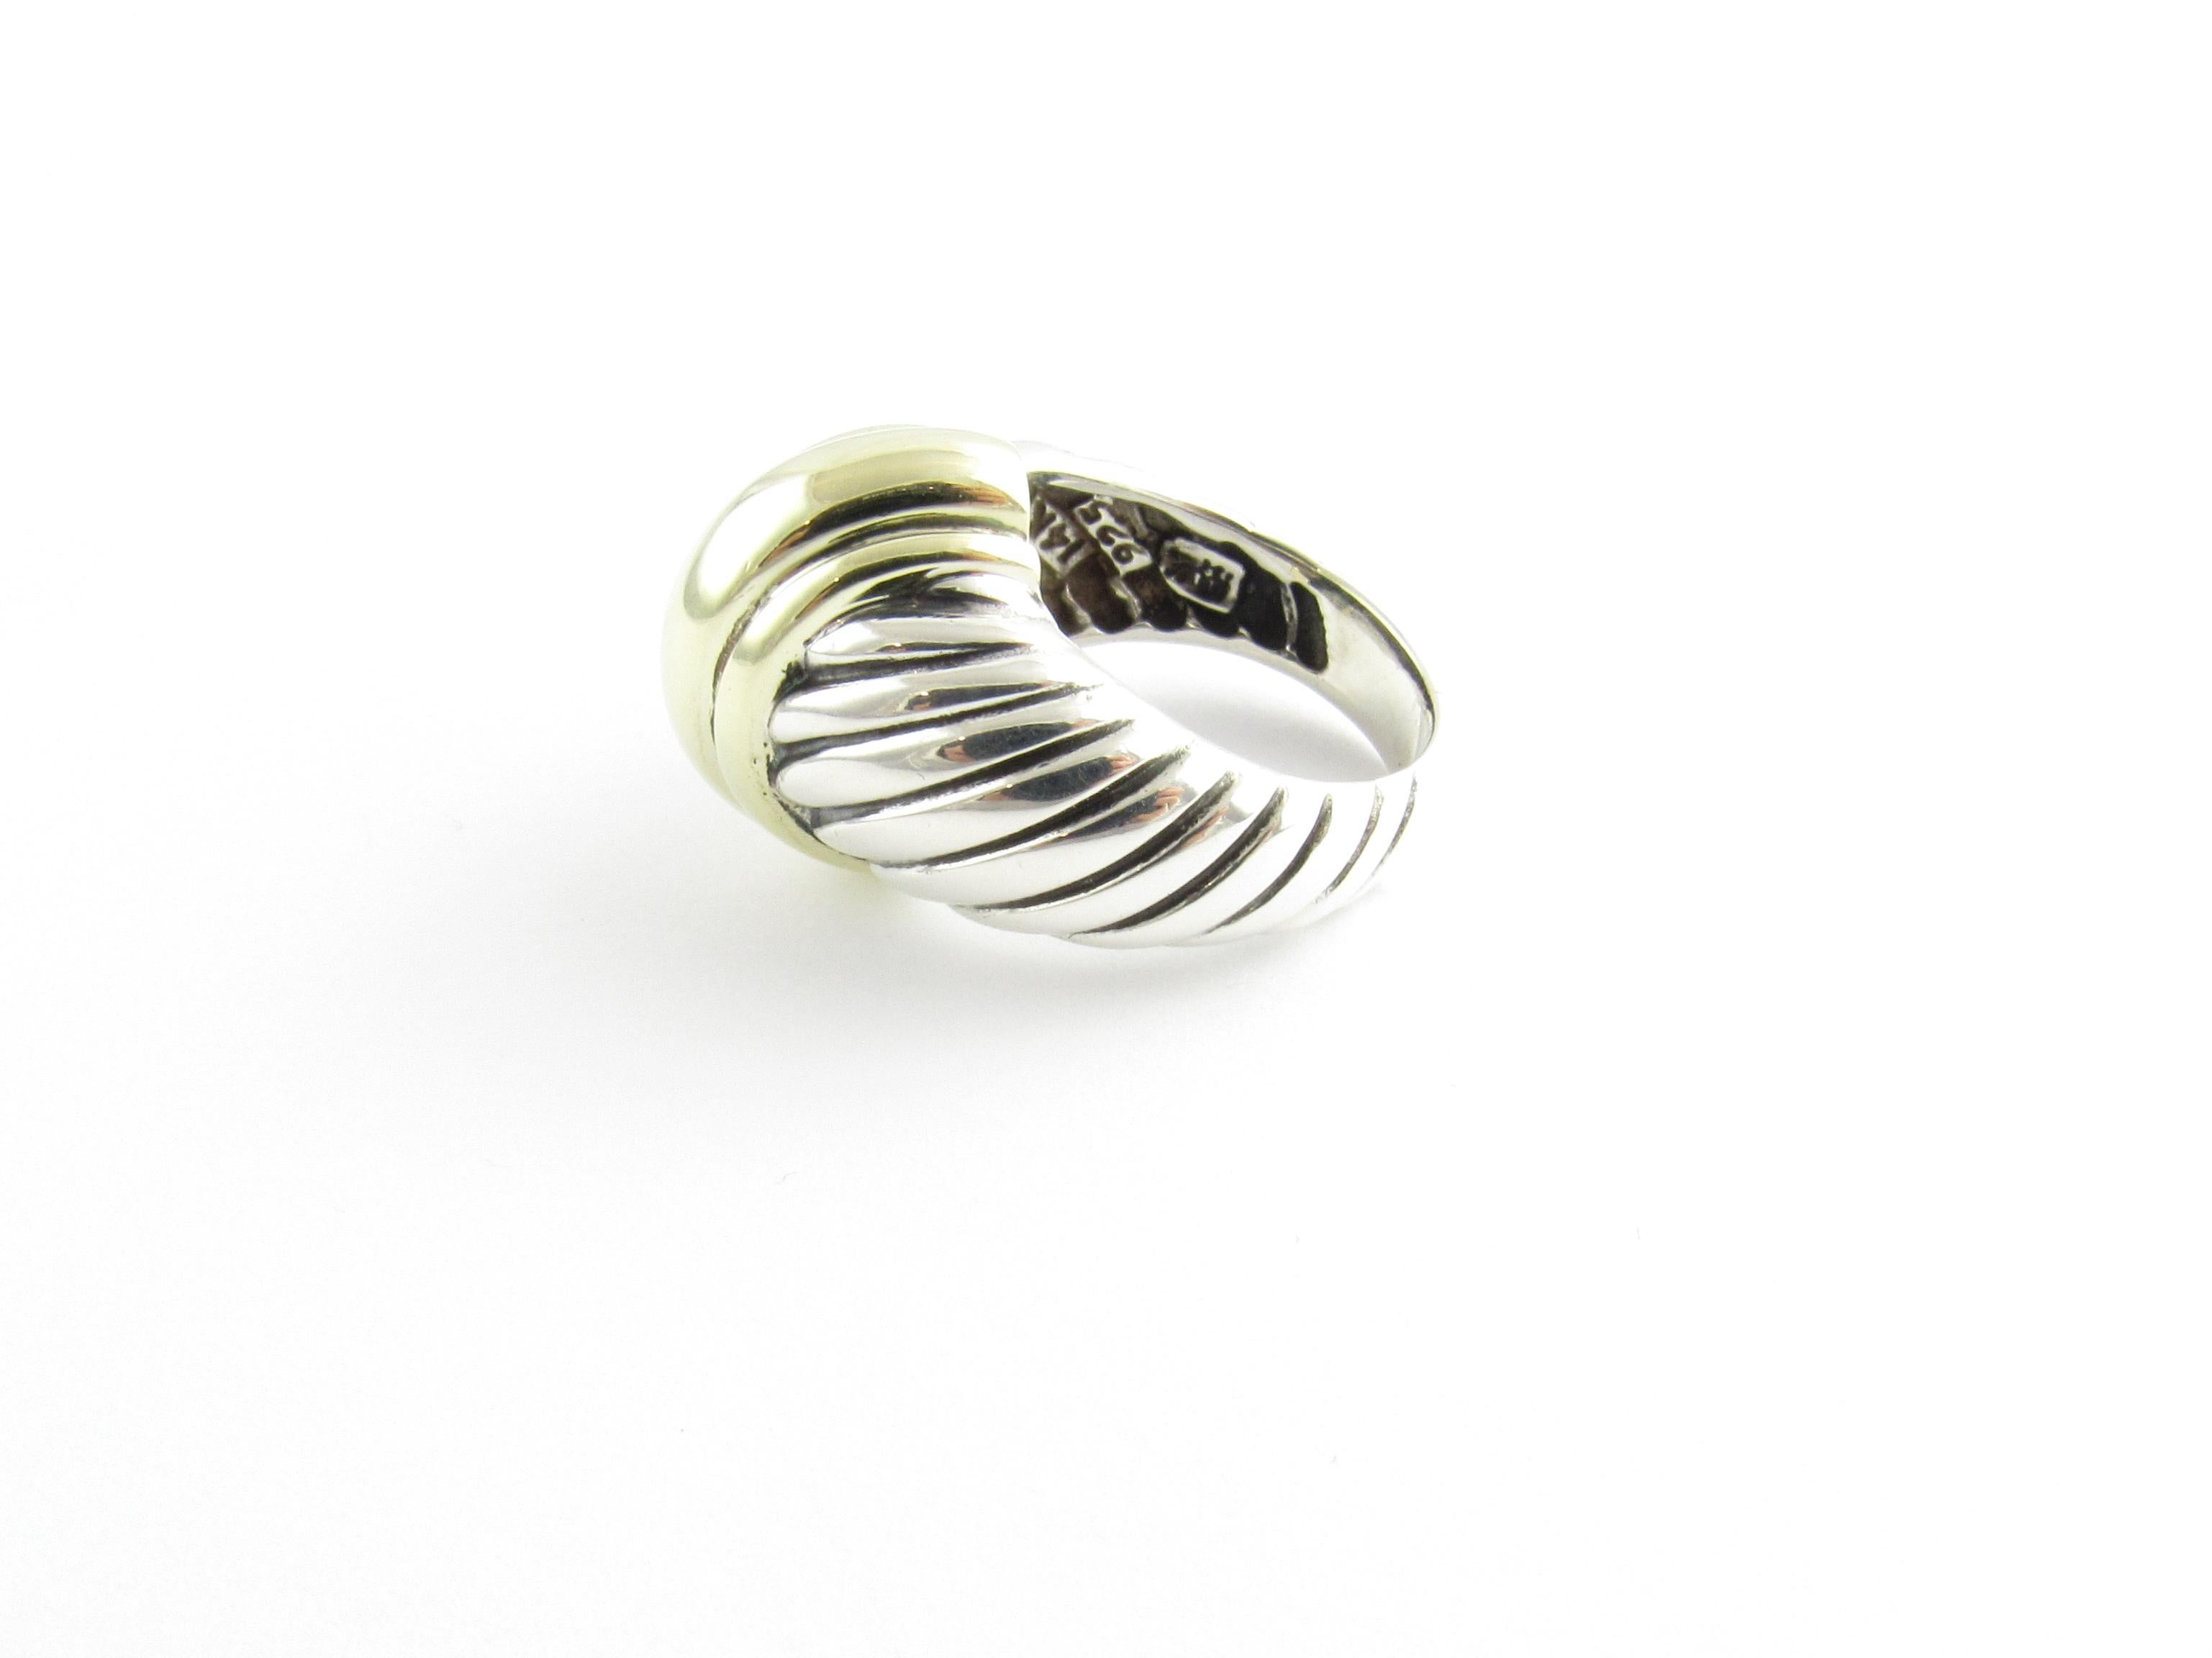 David Yurman Sterling Silver 14K Yellow Gold Shrimp Dome Ring

This authentic David Yurman dome ring is a size 6 1/4

The ring is approx. 16 mm wide in the front and 4.5 mm wide in the back

Stamped DY 925 585

8.6 g / 5.5 dwt

Very good pre owned